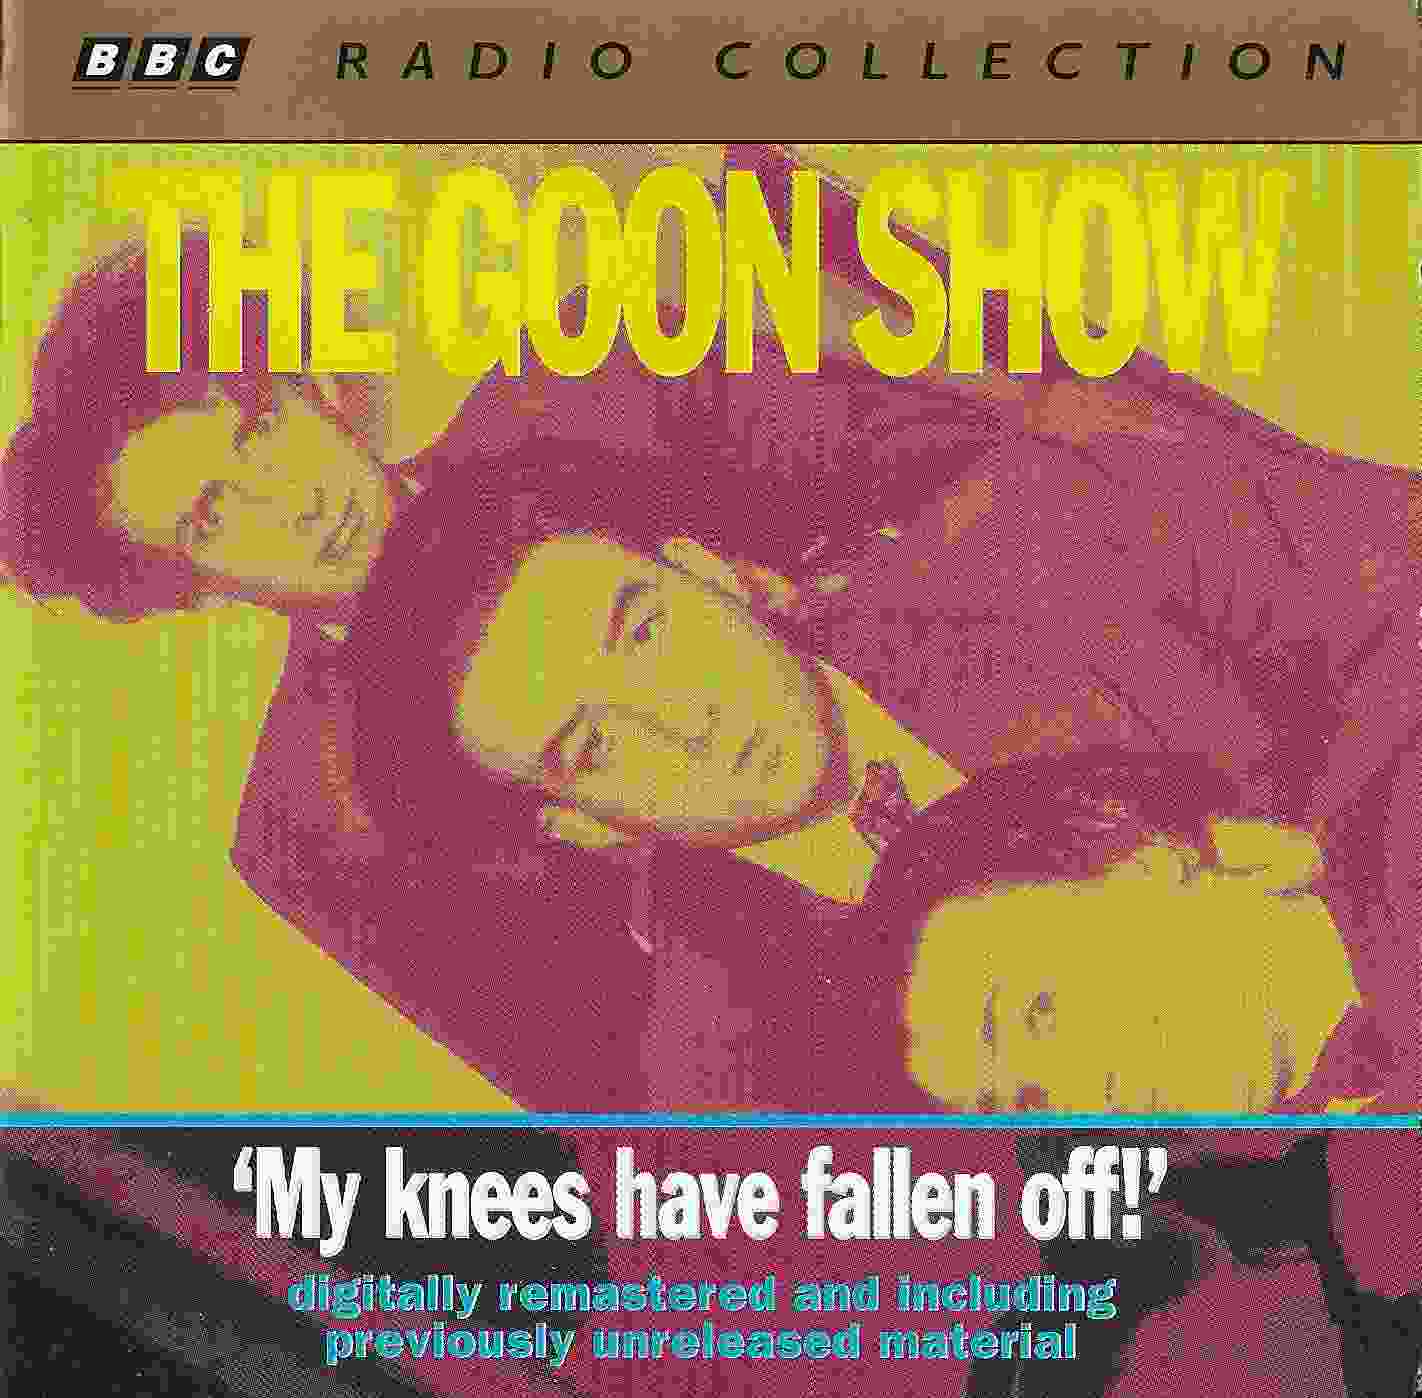 Picture of ZBBC 1867 CD The Goon show 4 - My knees have fallen off! by artist Spike Milligan / Larry Stephens from the BBC cds - Records and Tapes library